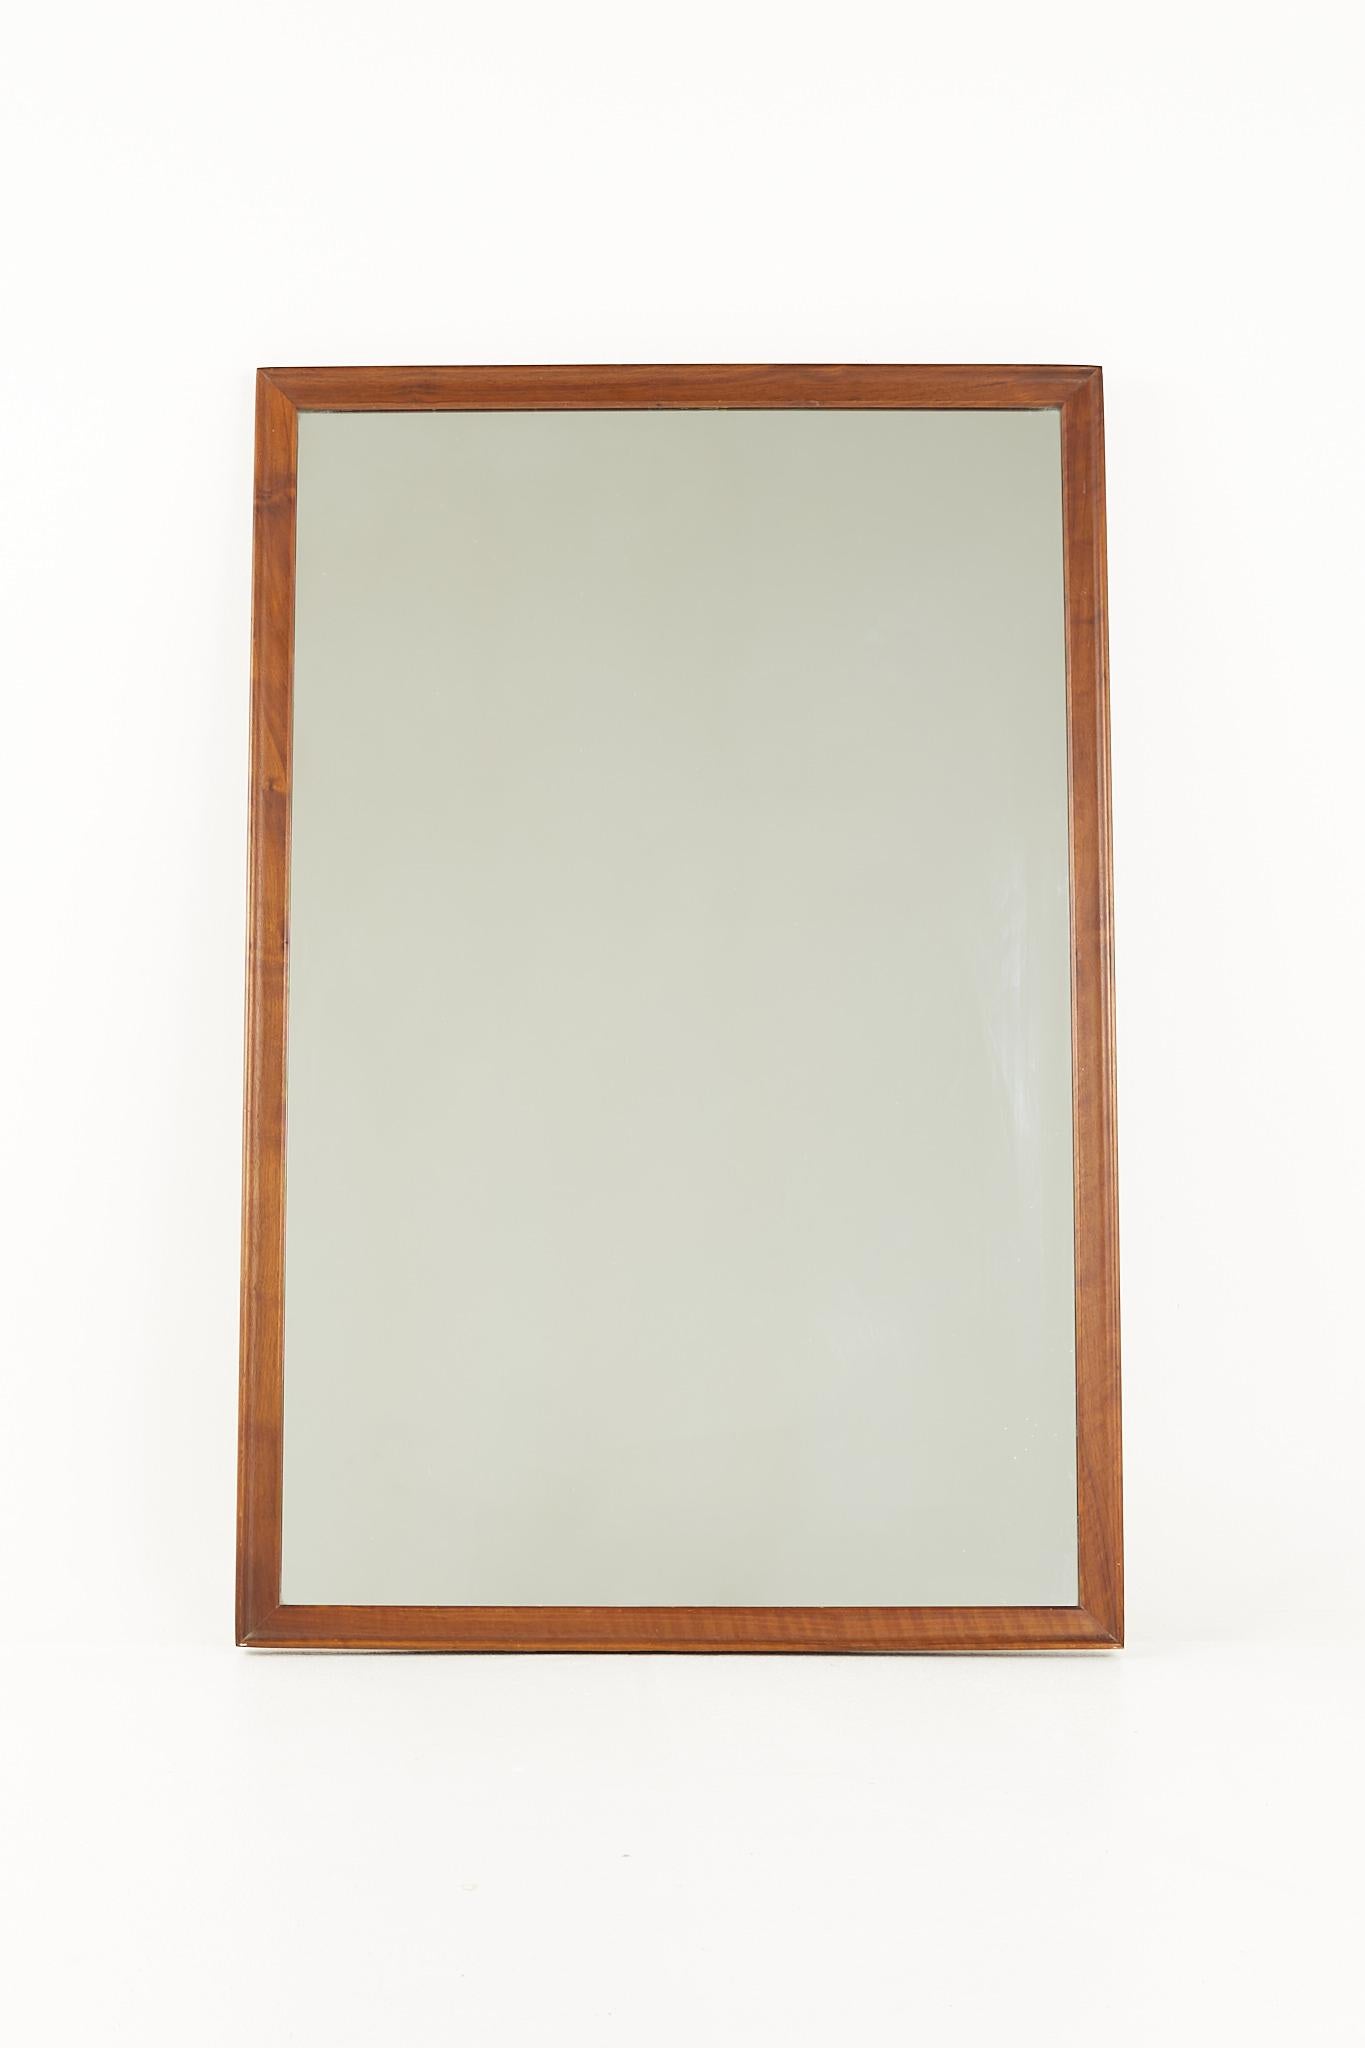 Kipp Stewart for drexel declaration mid century mirror

Mirror measures: 32.5 wide x 1.25 deep x 48.5 inches high

All pieces of furniture can be had in what we call restored vintage condition. That means the piece is restored upon purchase so